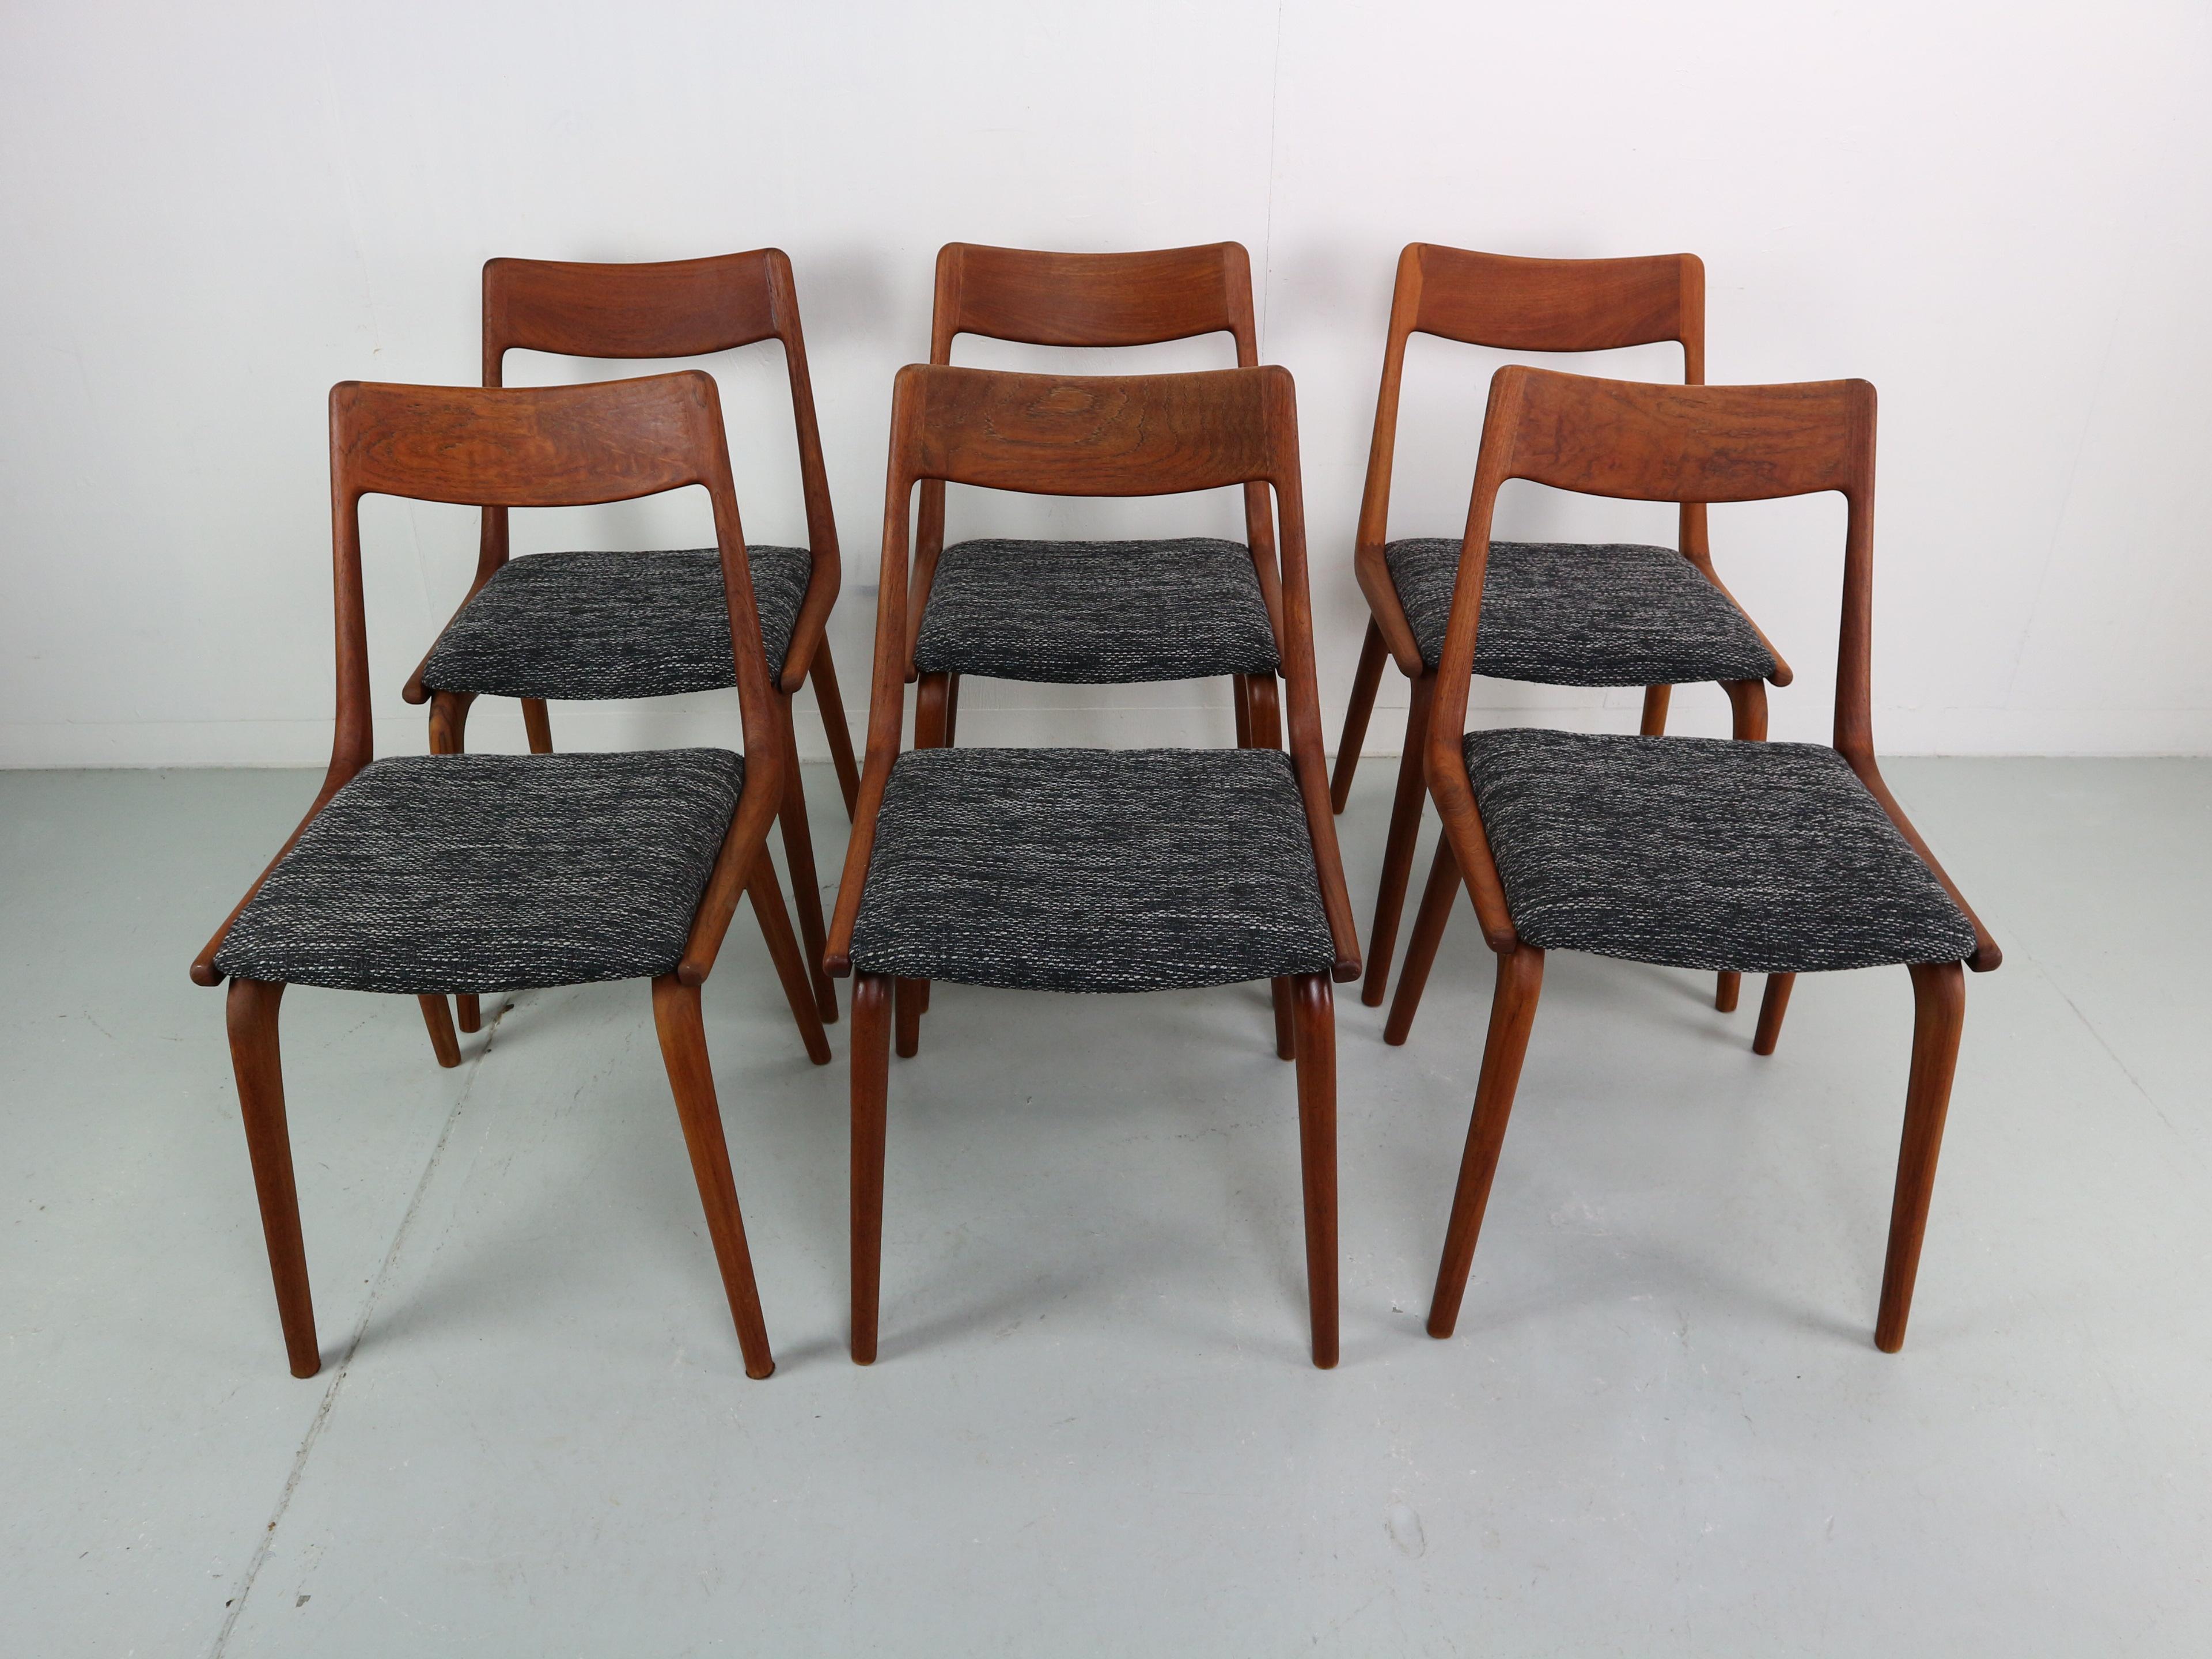 Elegant set of Danish dining chairs, featuring a teak frame. Seen from the side, the seat's frame that flows over to the backrest has a boomerang shape, hence the model's nickname. This shape is repeated in the legs. The backrest has a subtle curve,